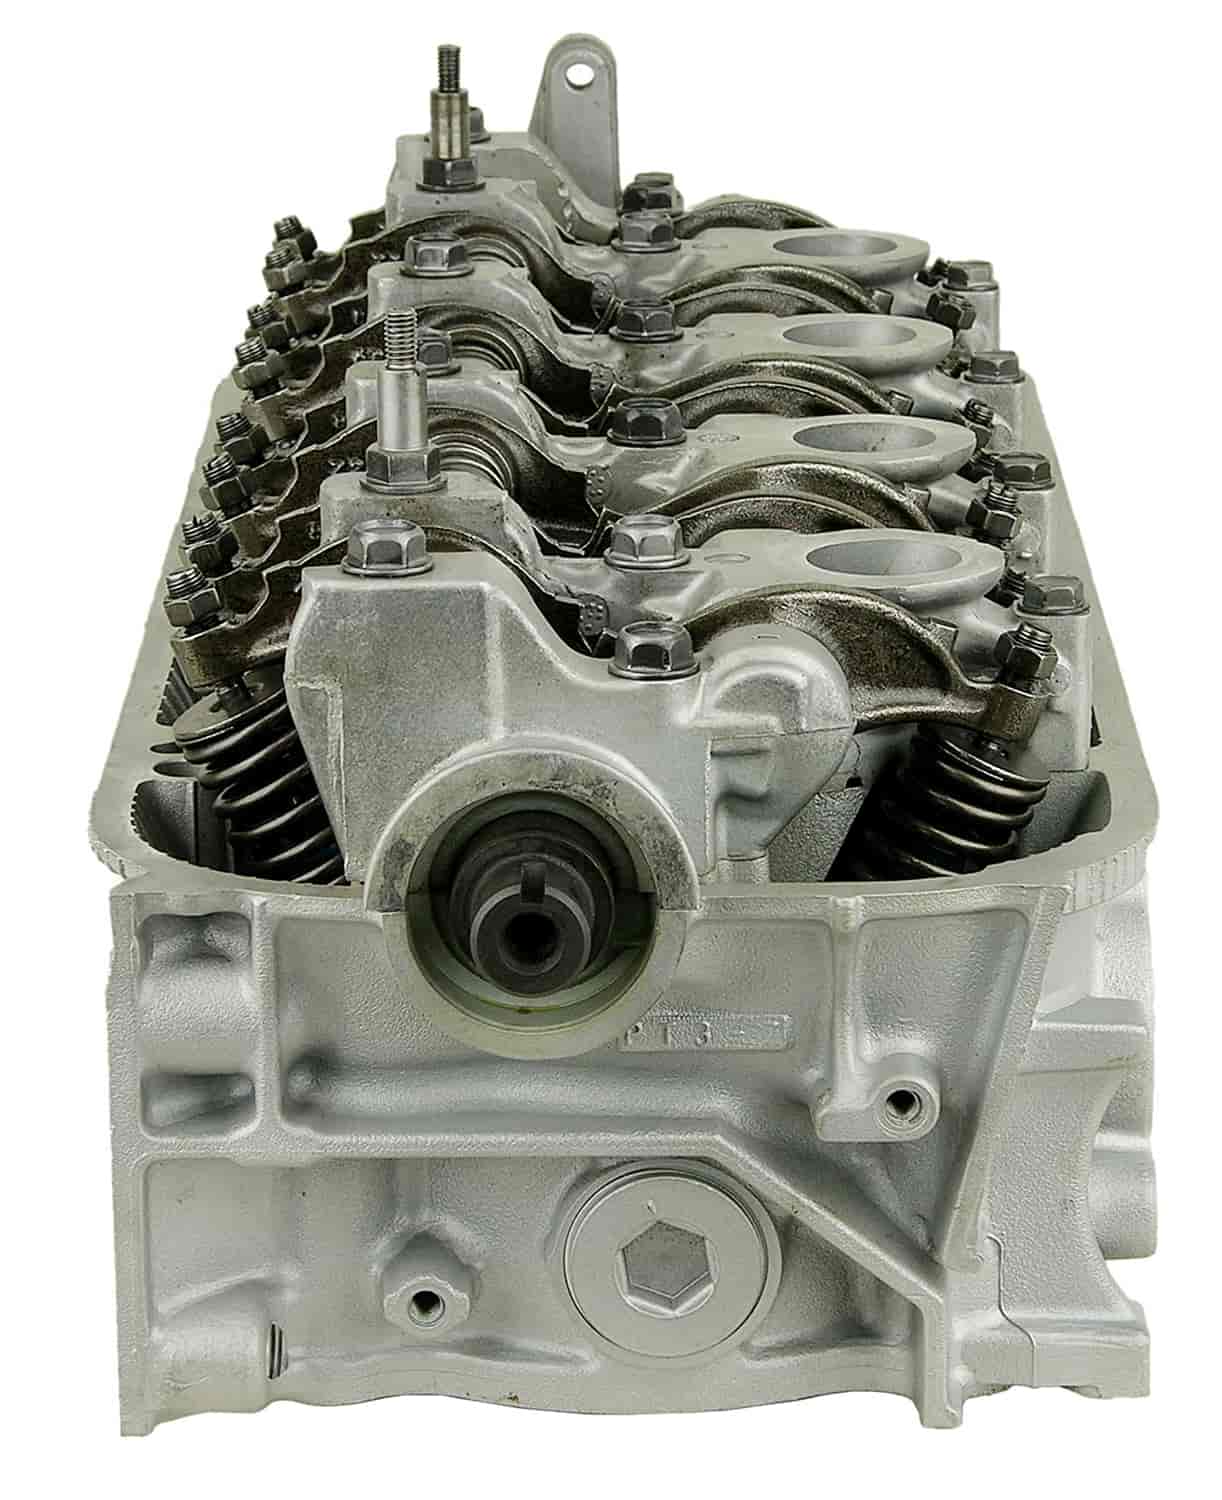 Remanufactured Cylinder Head for 1992-1996 Honda Accord &